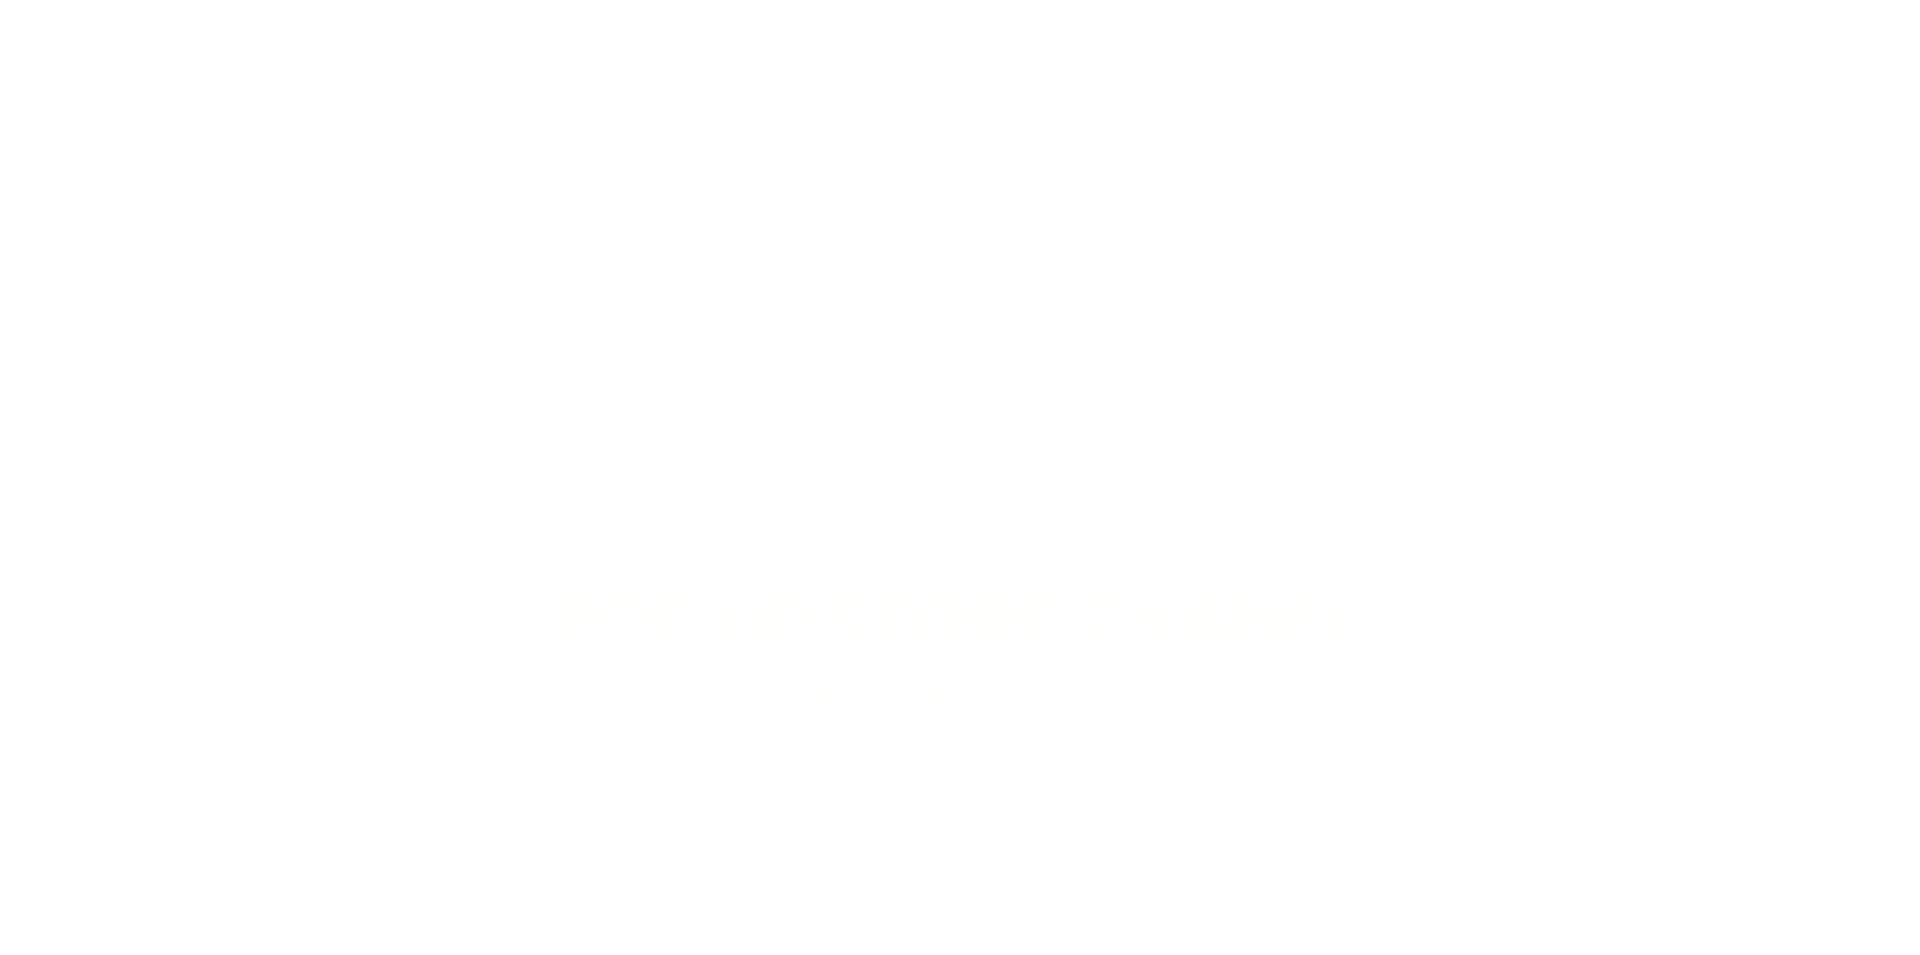 Pop Up Store Chanel